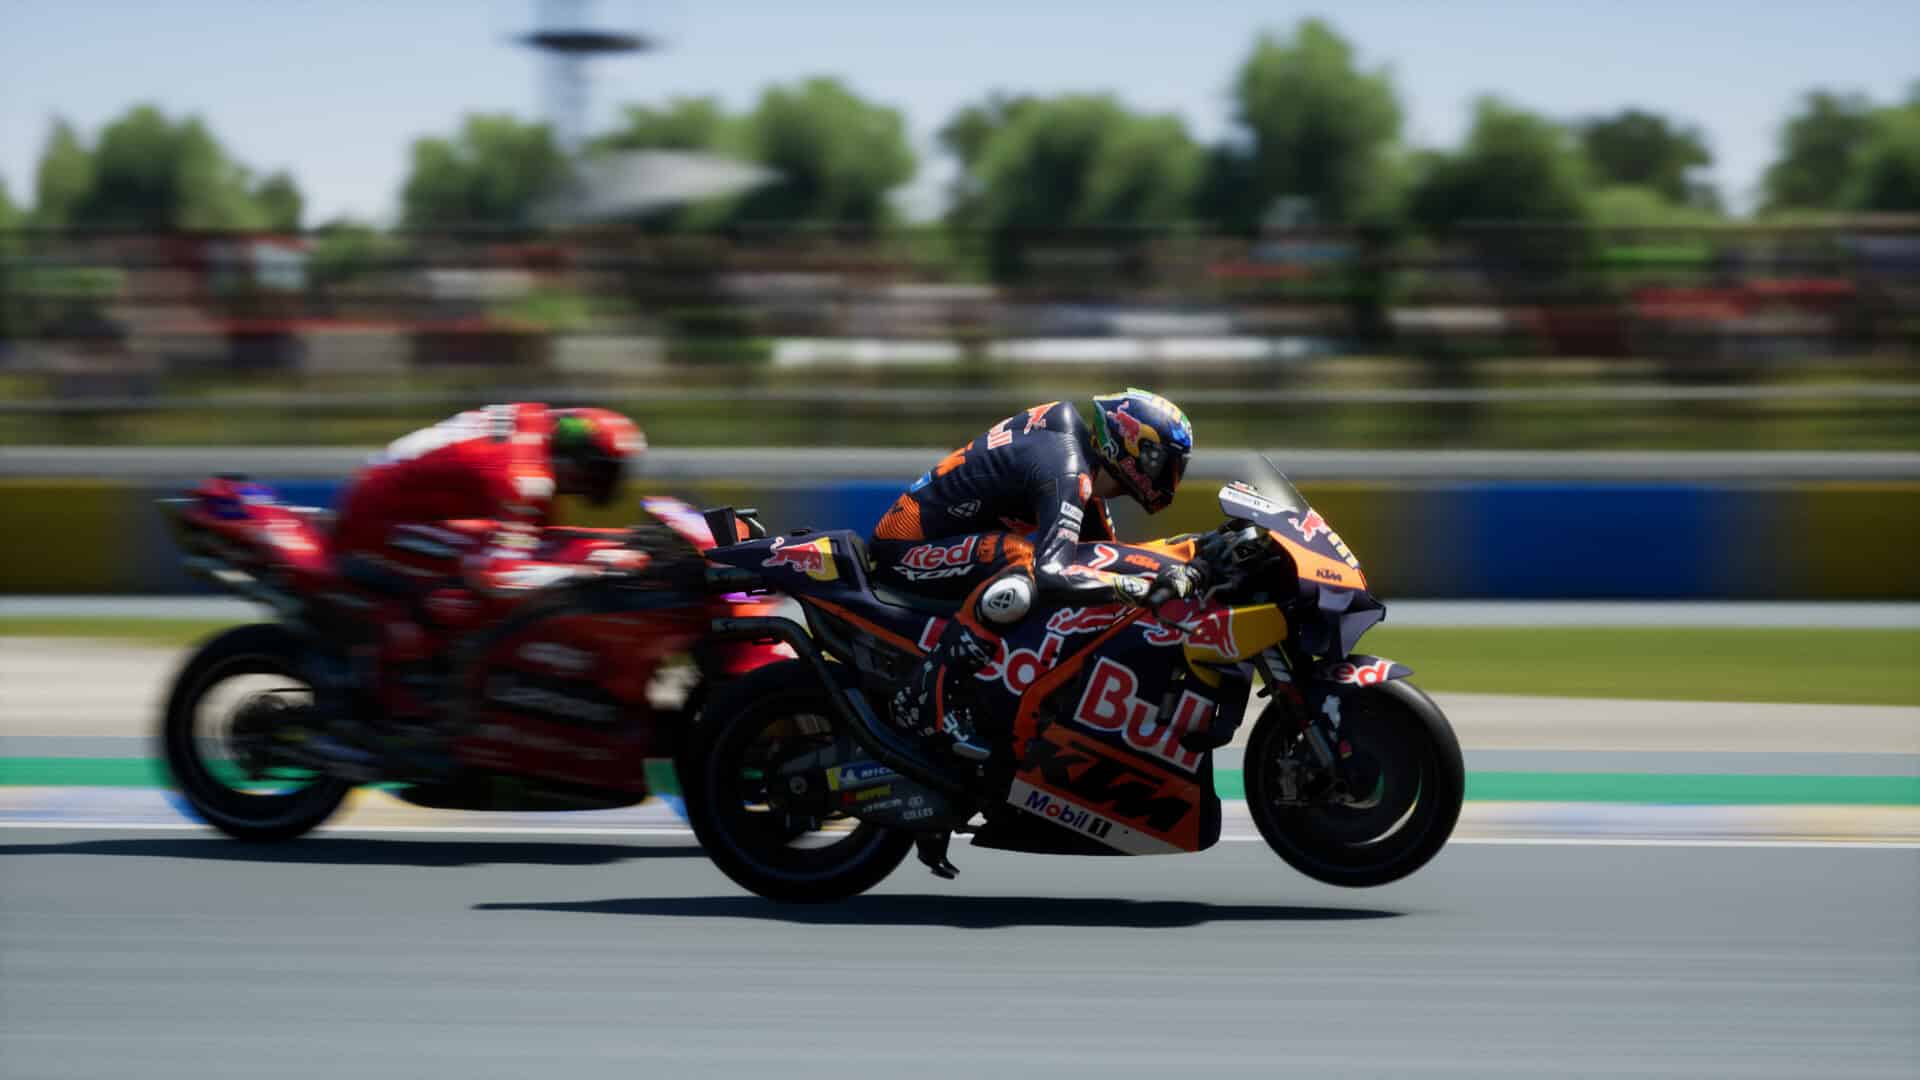 motogp 24 release time - two bikers race and lean into a turn